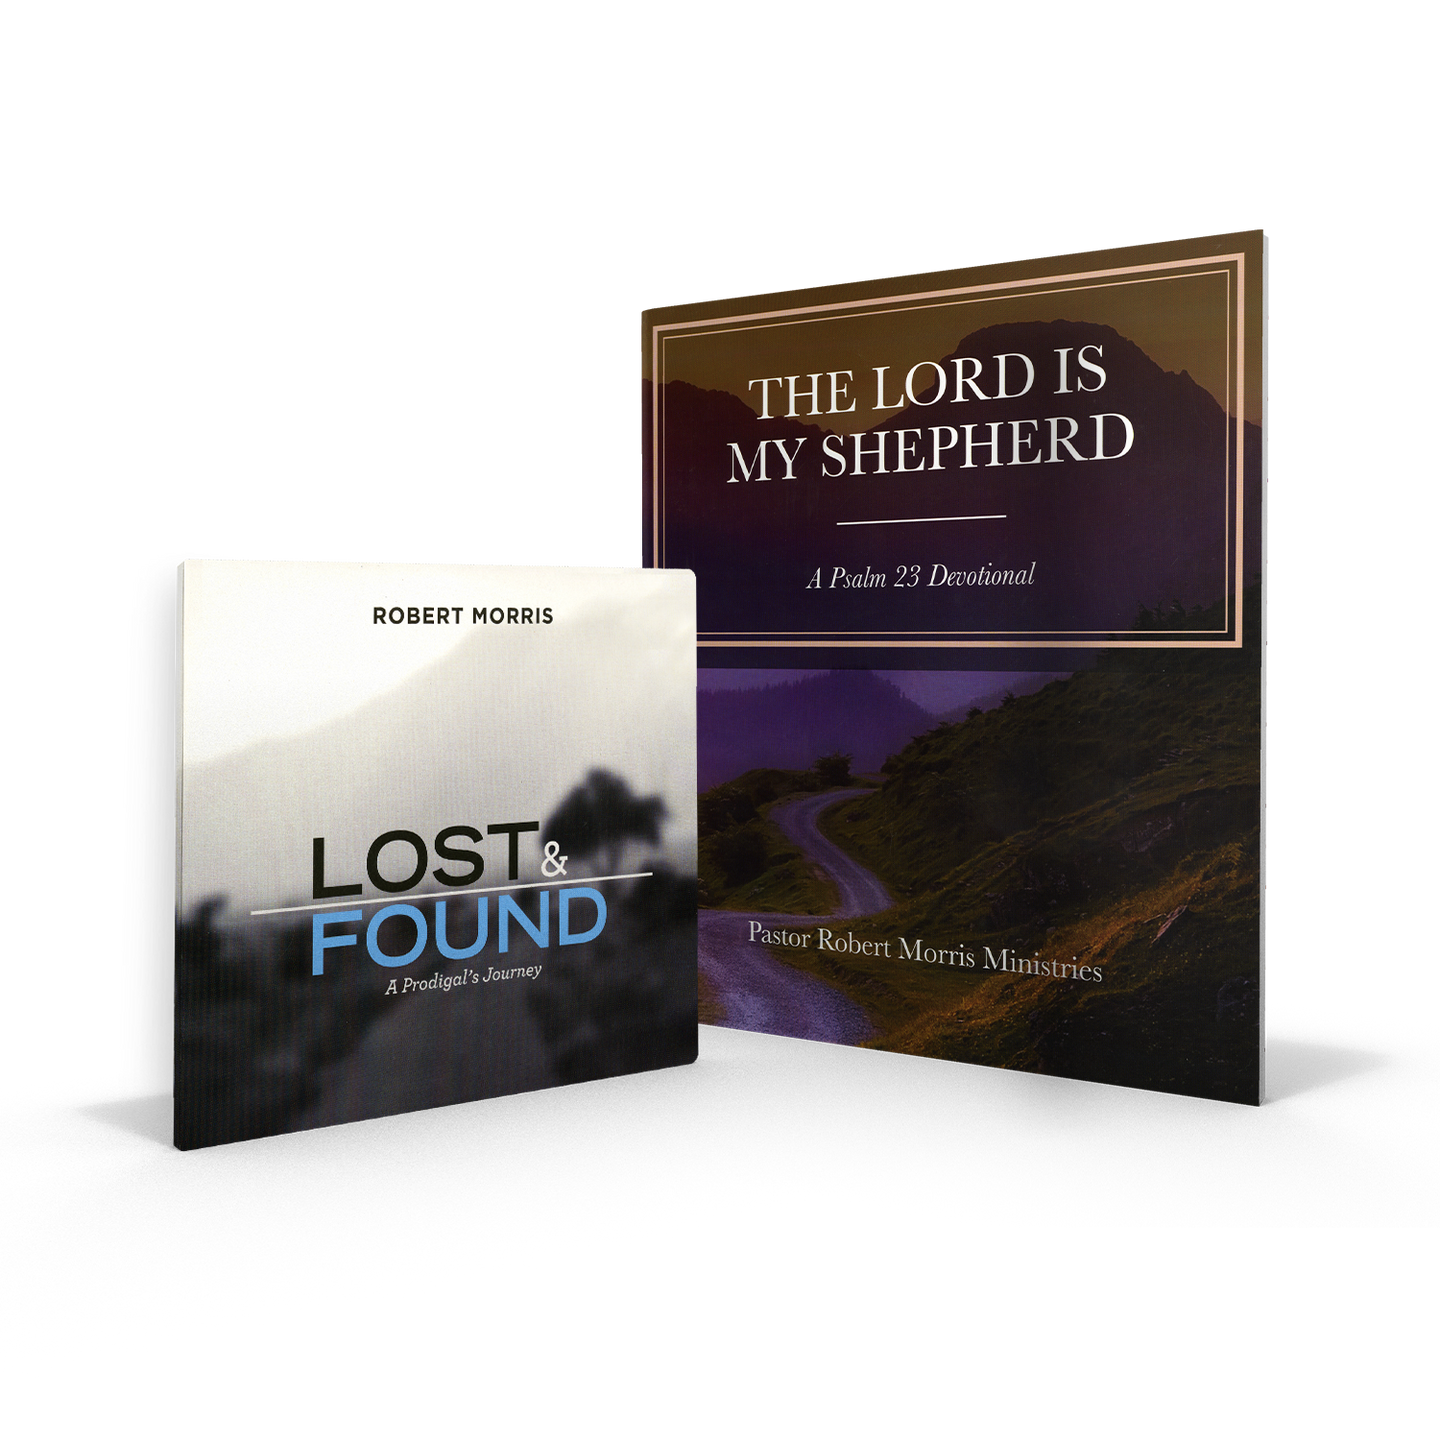 Lost & Found Special Offer with CD